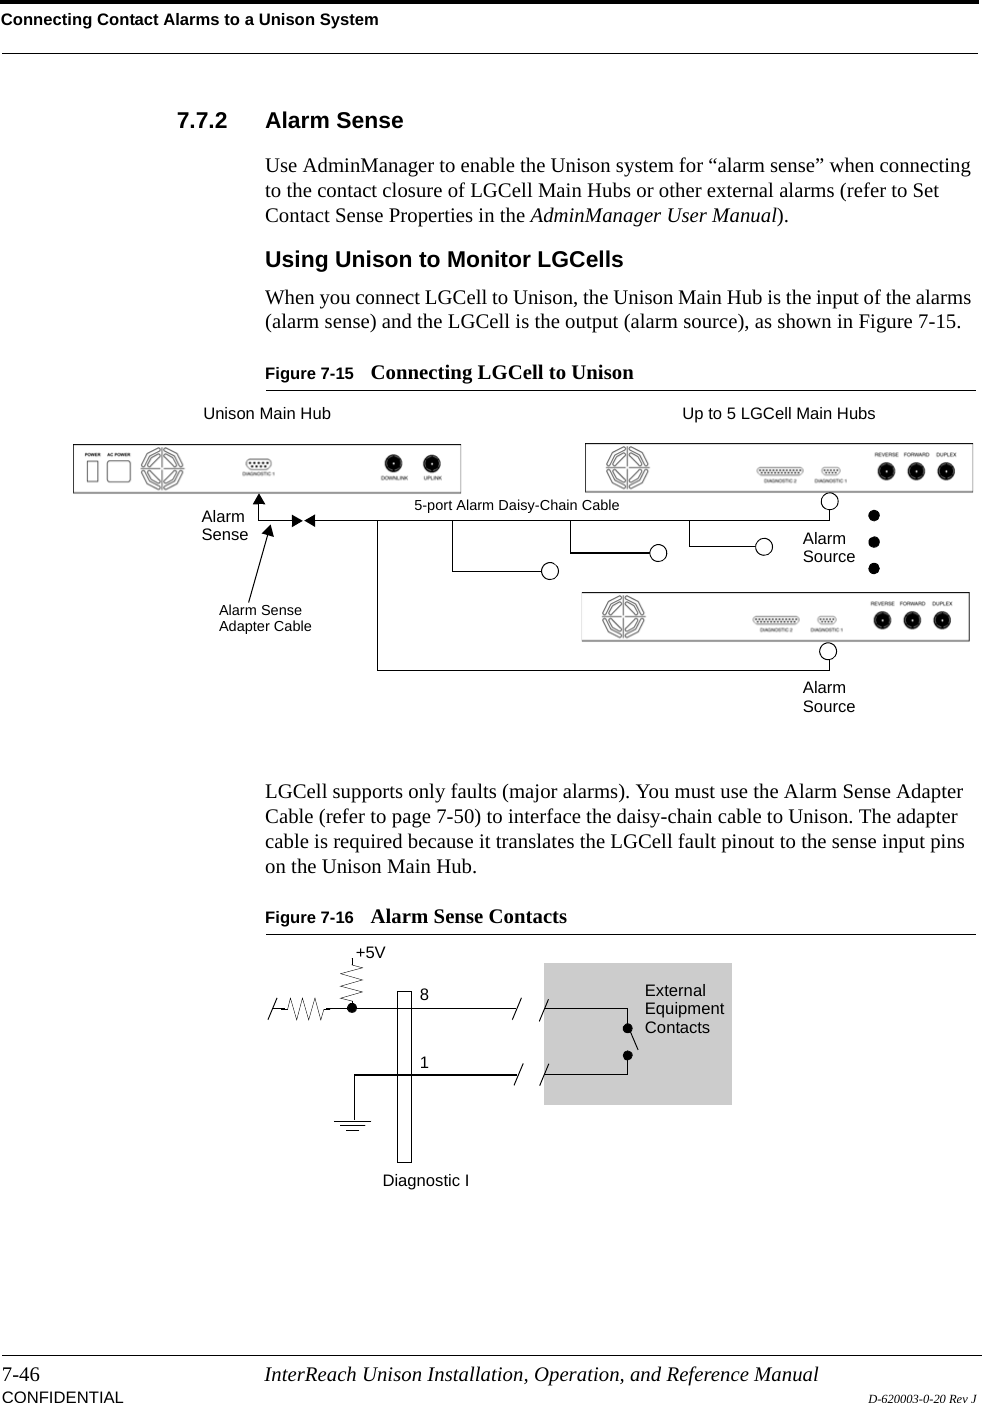 Connecting Contact Alarms to a Unison System7-46 InterReach Unison Installation, Operation, and Reference ManualCONFIDENTIAL D-620003-0-20 Rev J7.7.2 Alarm SenseUse AdminManager to enable the Unison system for “alarm sense” when connecting to the contact closure of LGCell Main Hubs or other external alarms (refer to Set Contact Sense Properties in the AdminManager User Manual).Using Unison to Monitor LGCellsWhen you connect LGCell to Unison, the Unison Main Hub is the input of the alarms (alarm sense) and the LGCell is the output (alarm source), as shown in Figure 7-15.Figure 7-15 Connecting LGCell to UnisonLGCell supports only faults (major alarms). You must use the Alarm Sense Adapter Cable (refer to page 7-50) to interface the daisy-chain cable to Unison. The adapter cable is required because it translates the LGCell fault pinout to the sense input pins on the Unison Main Hub.Figure 7-16 Alarm Sense ContactsUp to 5 LGCell Main HubsUnison Main HubAlarmSense AlarmSourceAlarmSourceAlarm SenseAdapter Cable5-port Alarm Daisy-Chain Cable81Diagnostic IExternalEquipmentContacts+5V